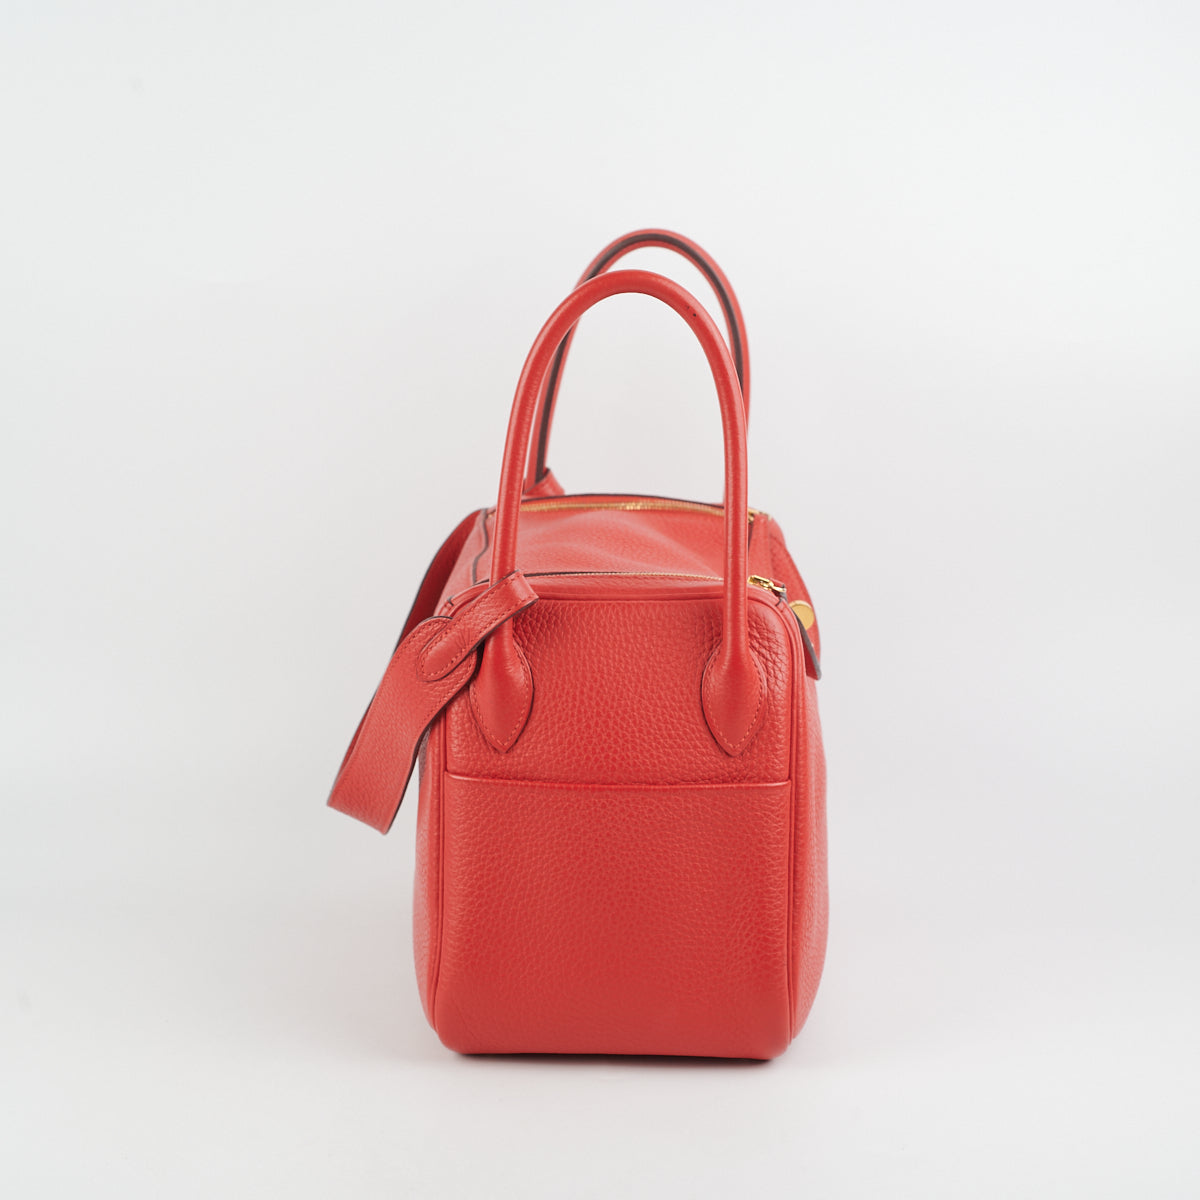 HERMES LINDY 26 ROUGE TOMATE CLEMENCE - BJ Luxury